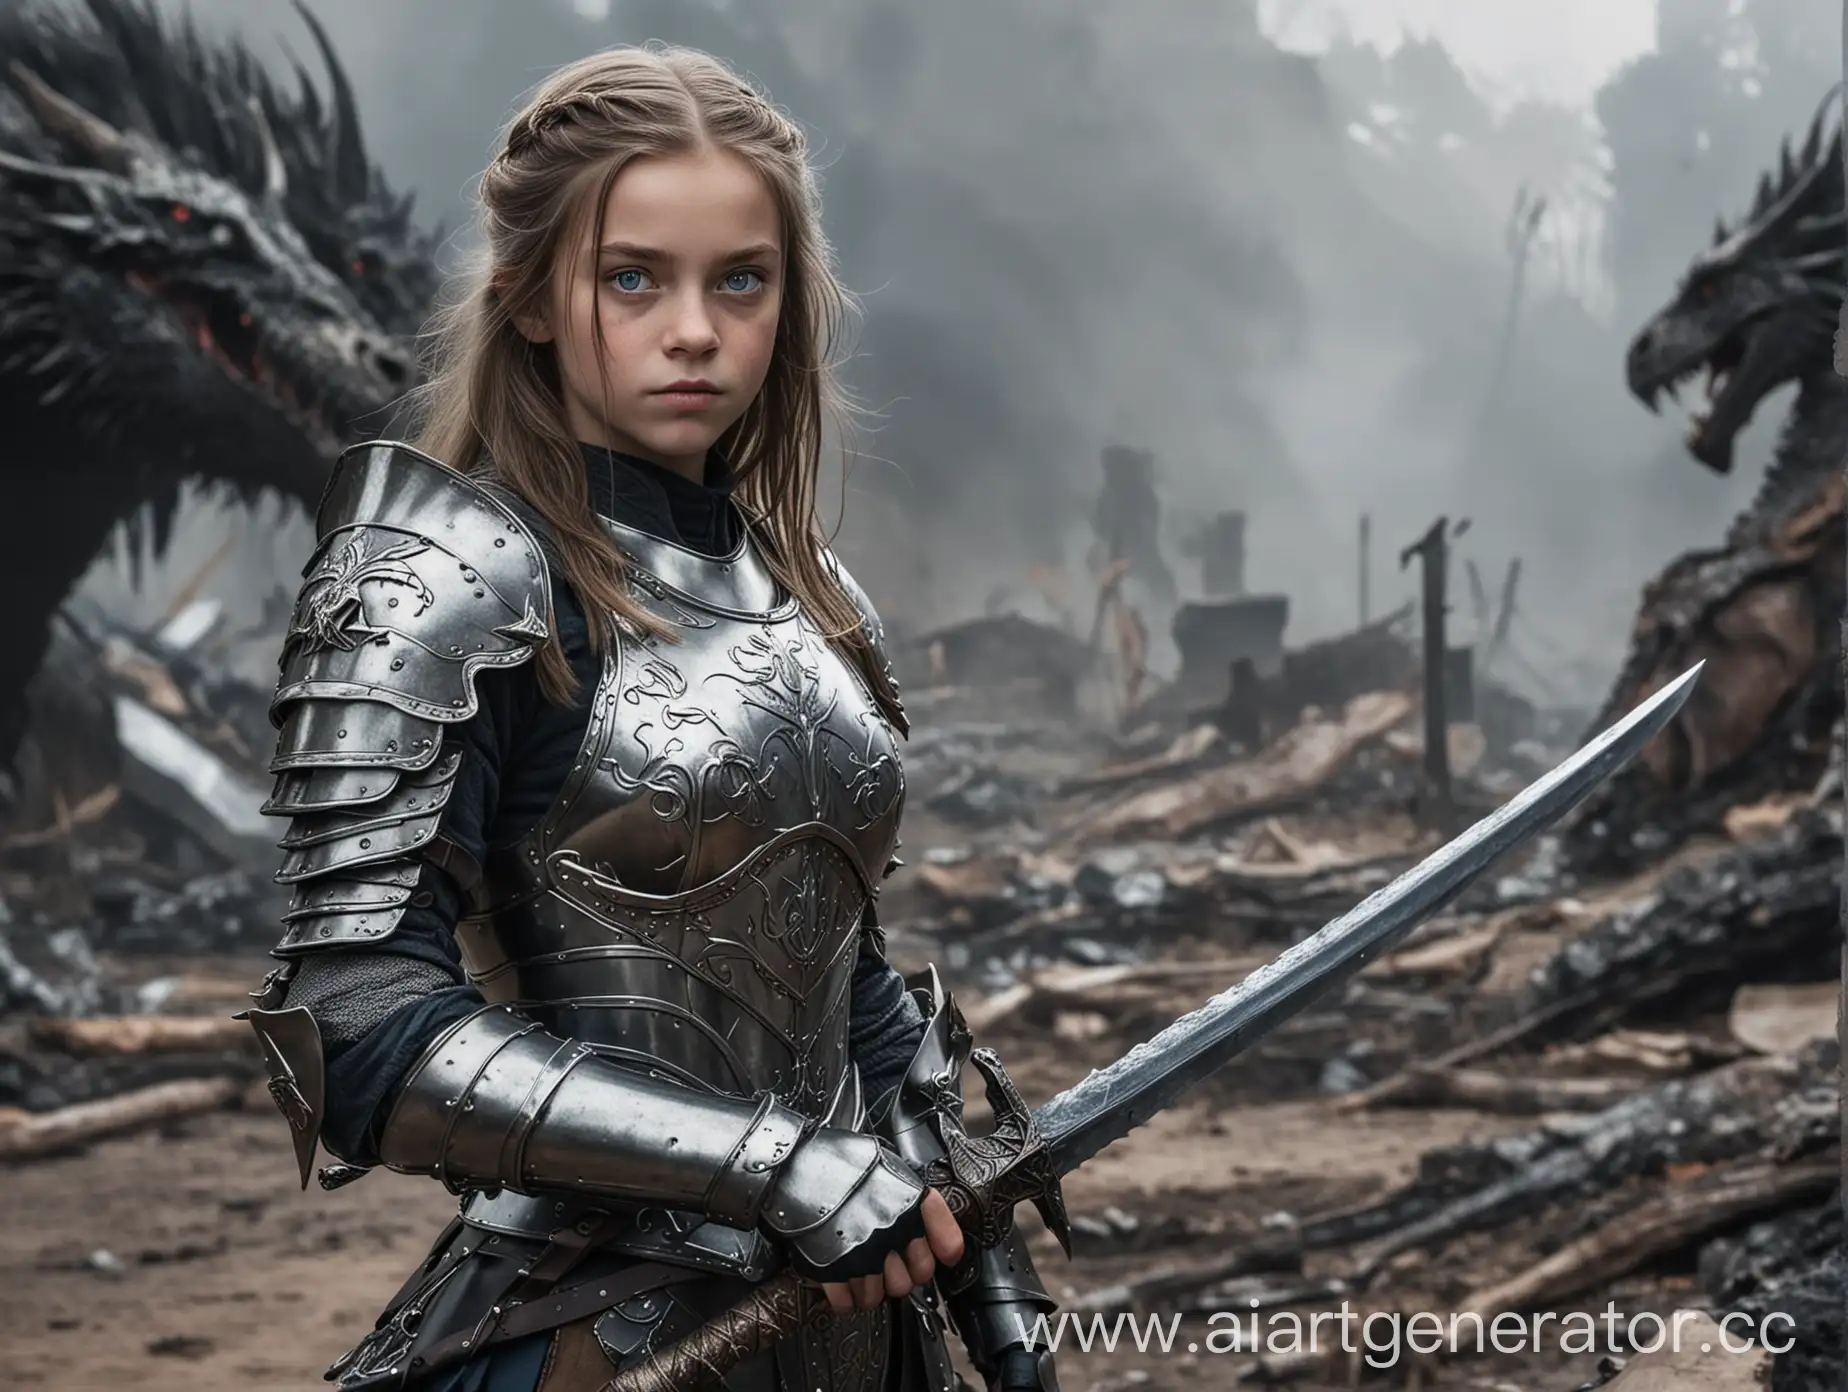 Young-Girl-Warrior-with-Sword-Standing-Victorious-over-Slain-Dragon